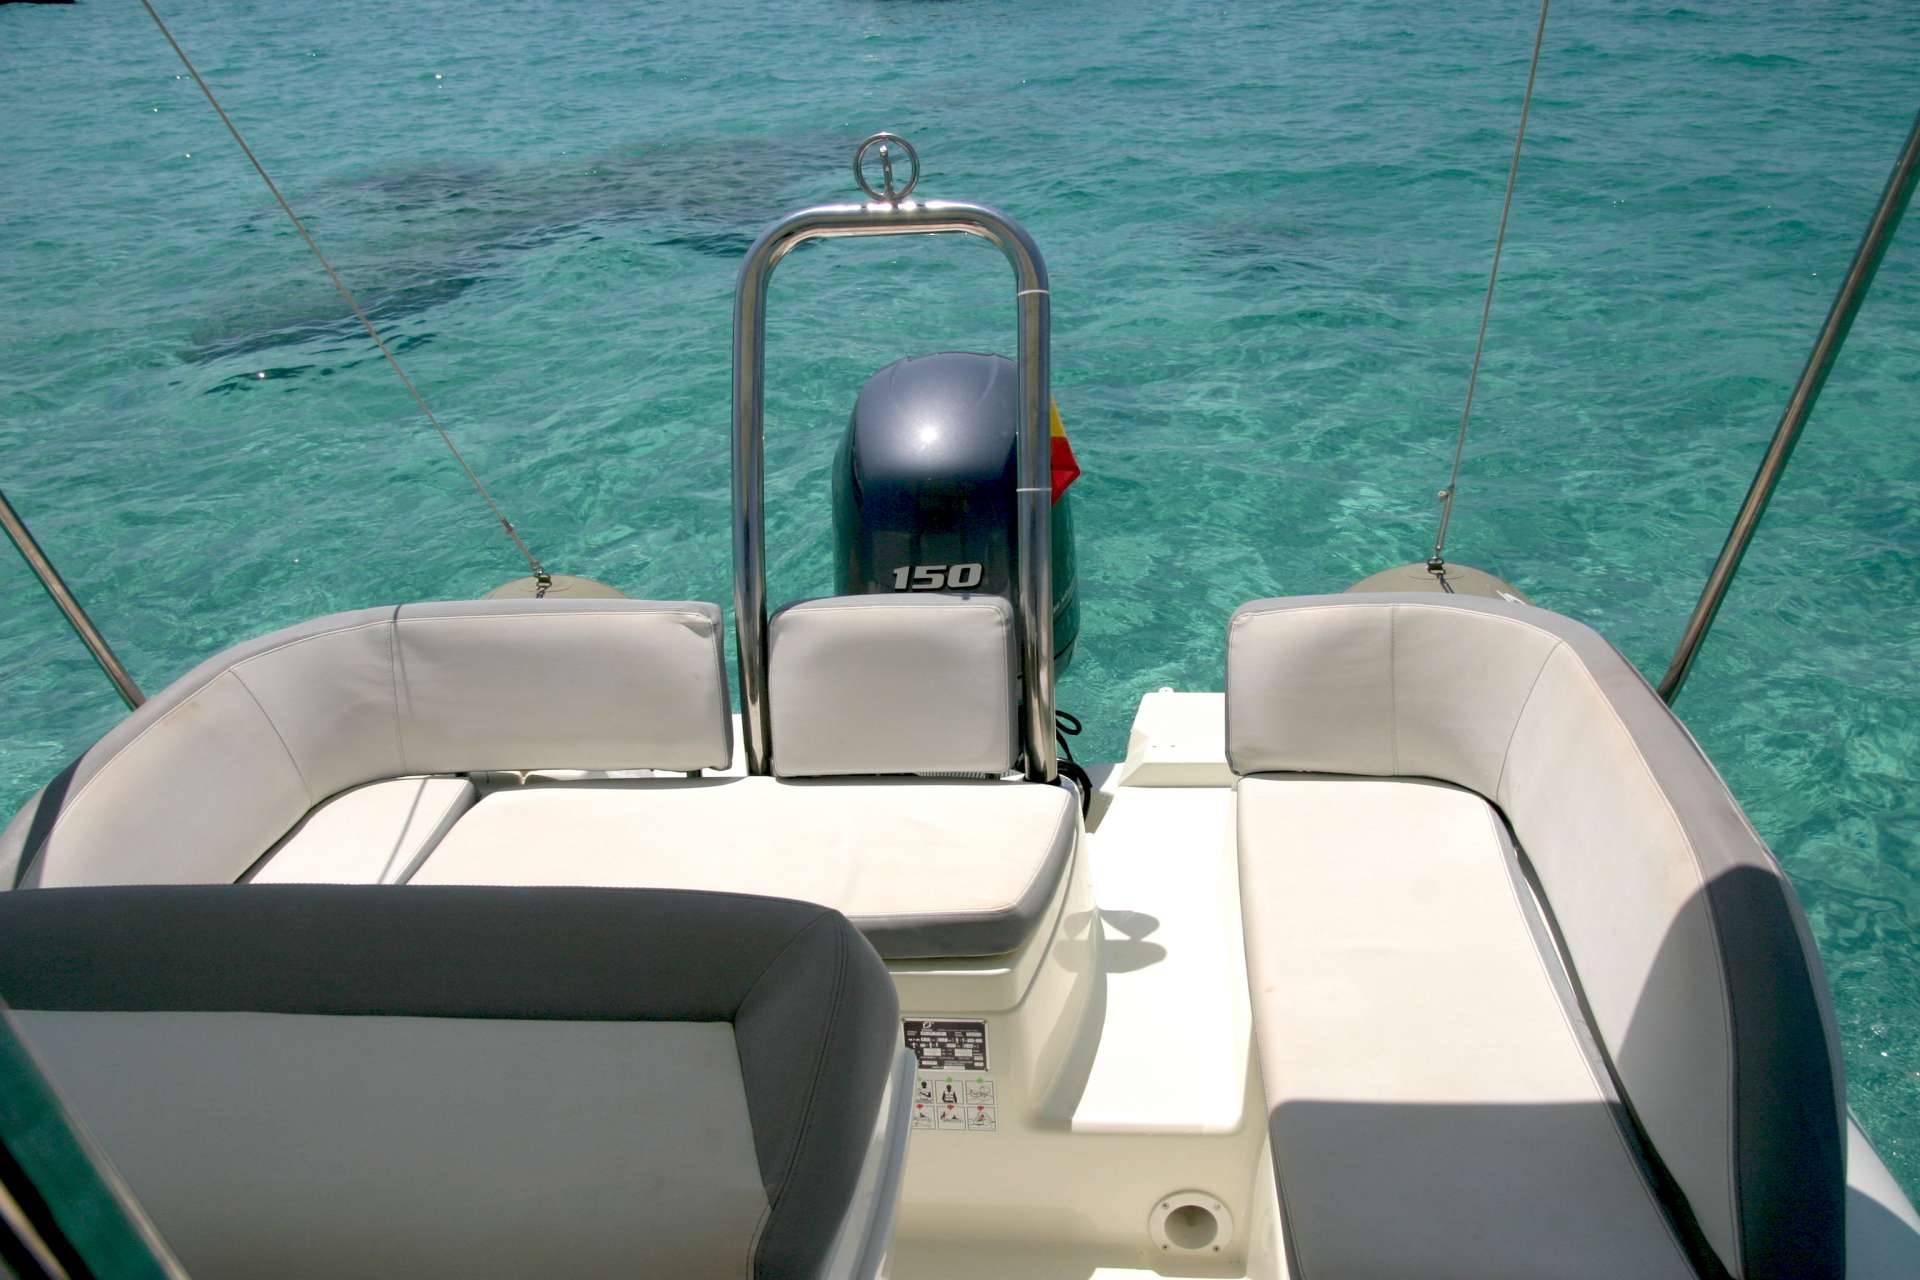 Discover the Formentera Island with this comfortable inflatable rib in Ibiza!